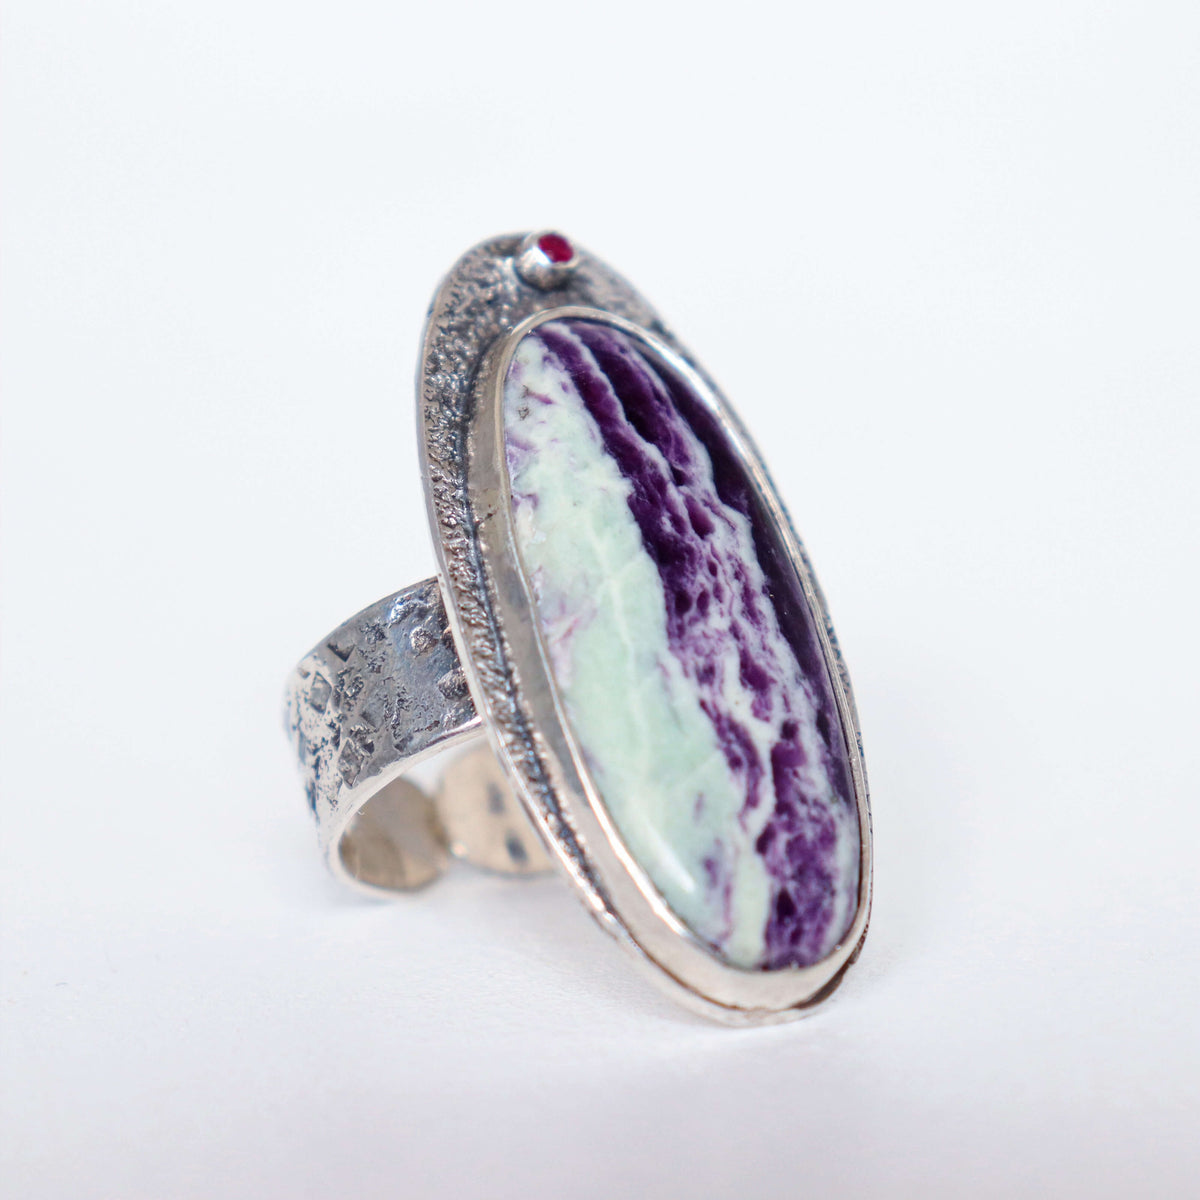 adjustable silver ring with gemstones, purple stone ring, handcrafted by Roff Jewellery